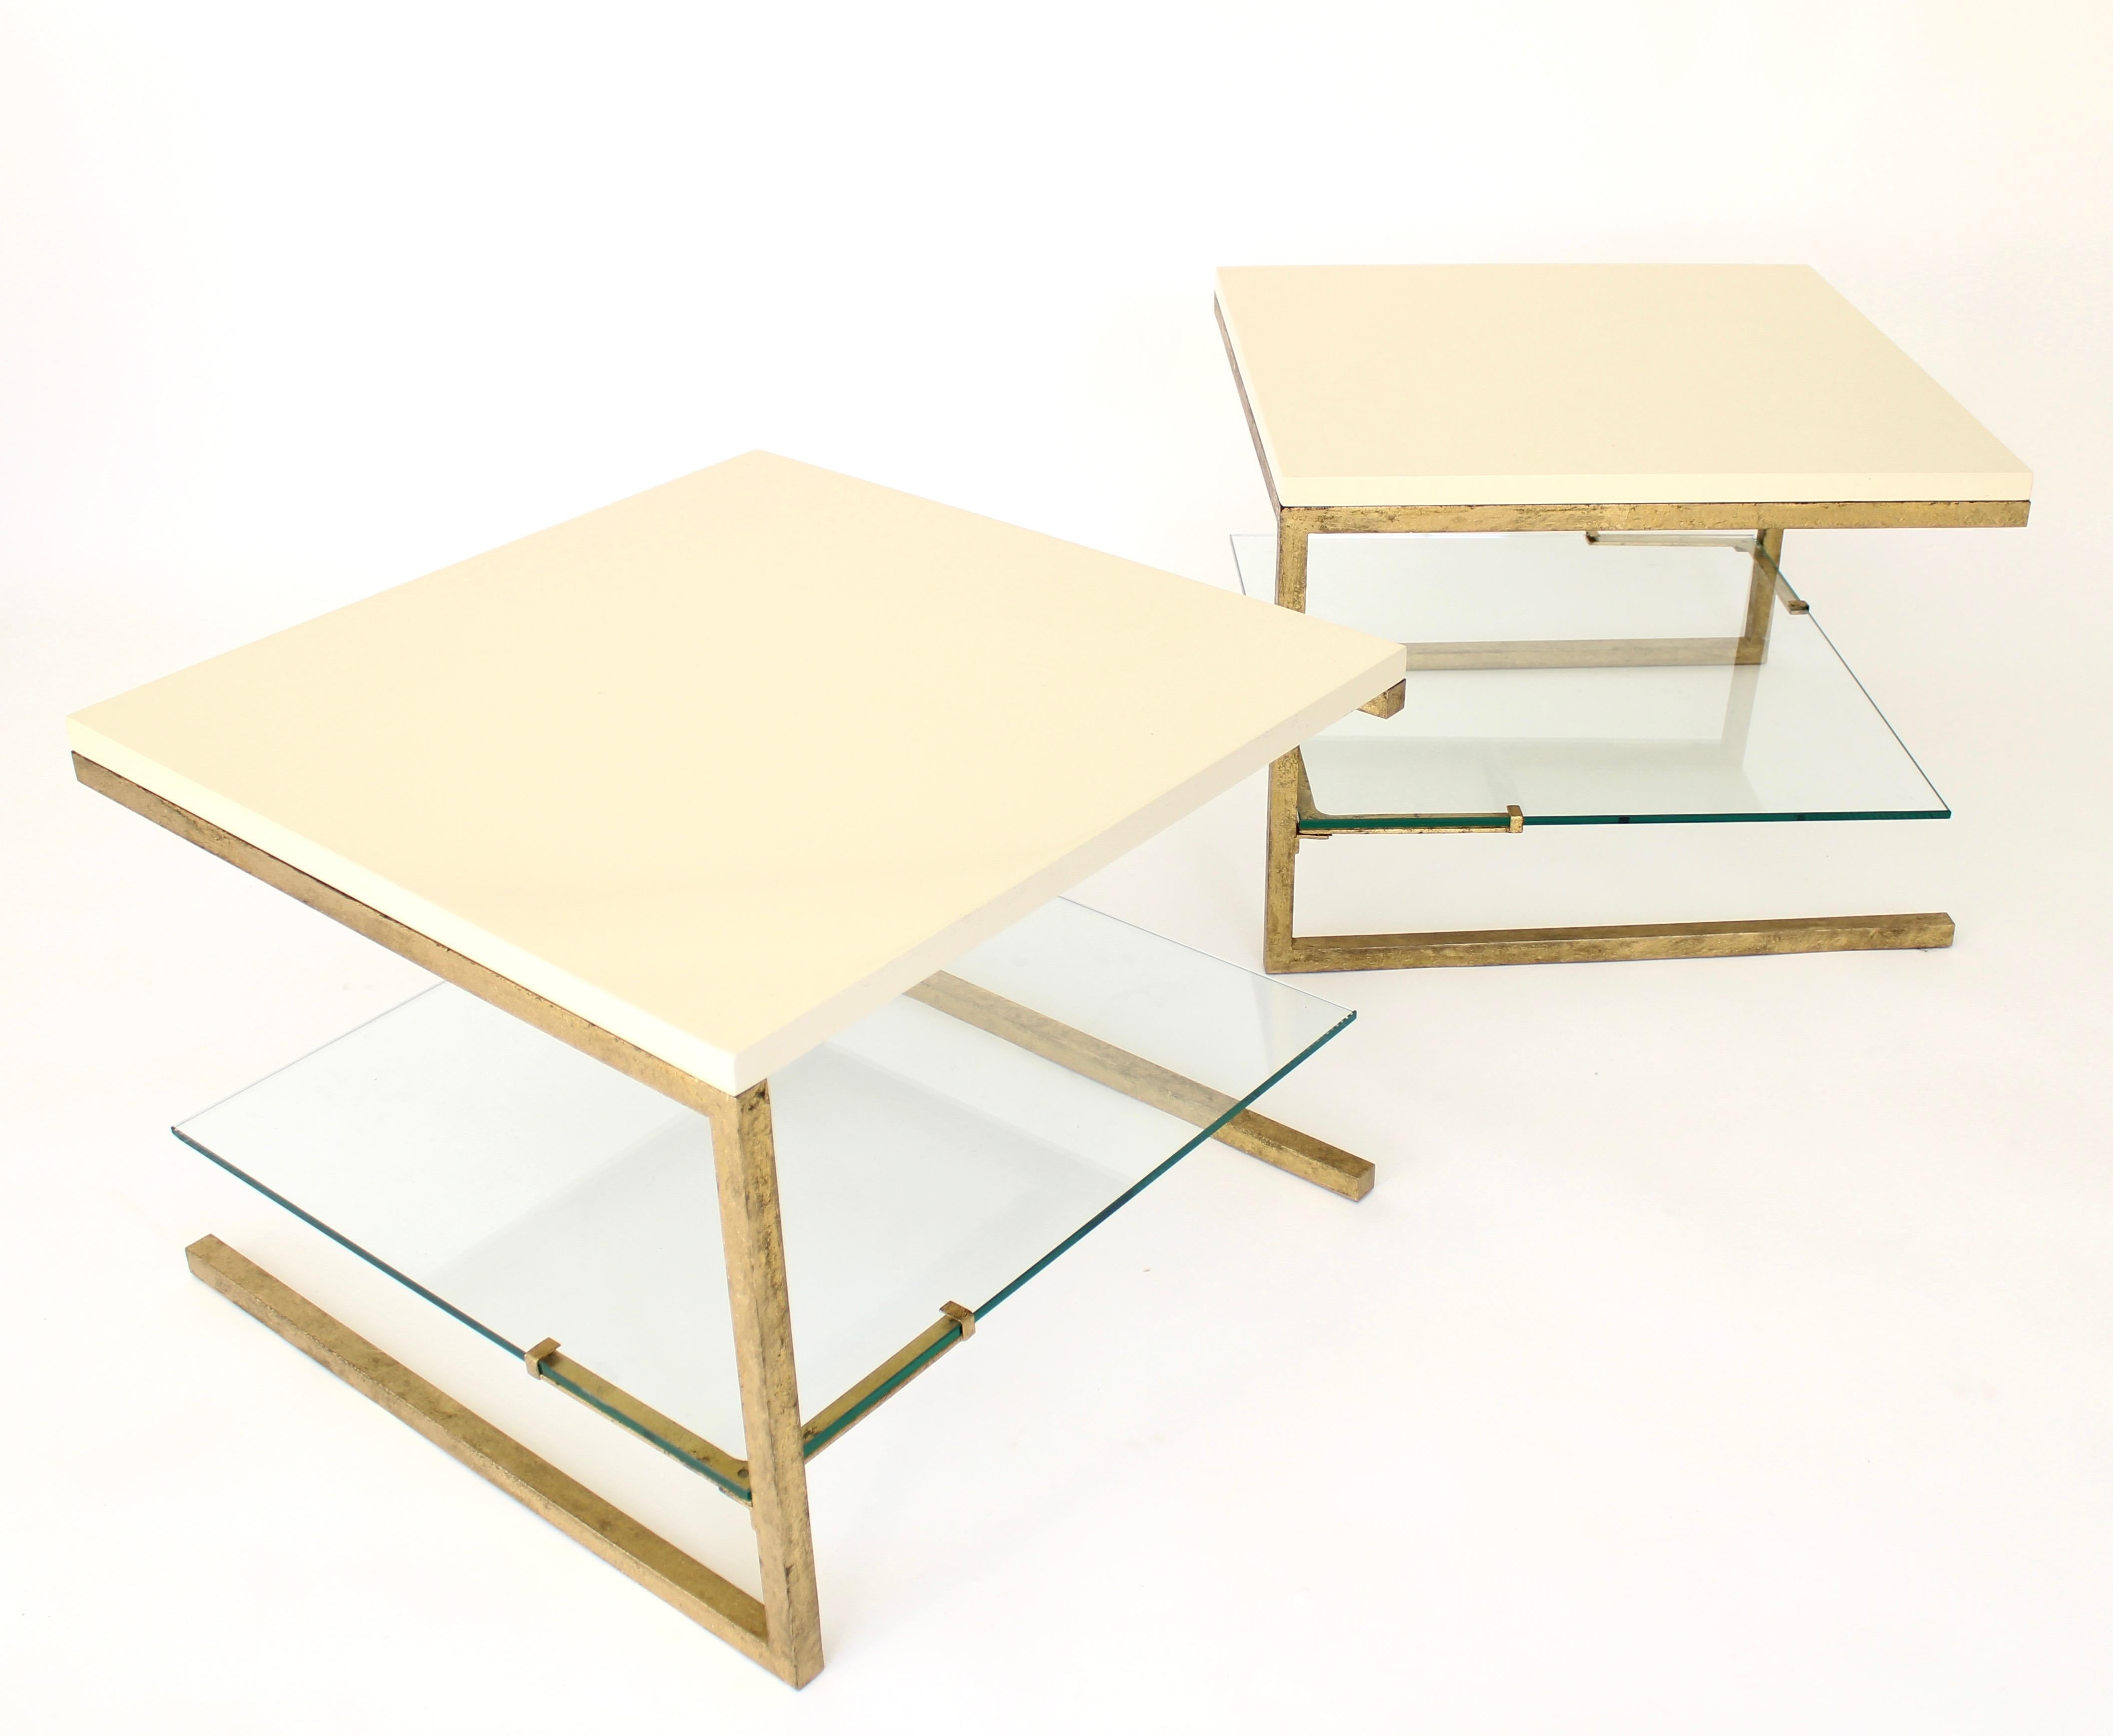  Maison Ramsay Side Tables Pair of Cream Lacquered Top Gilded Iron Frame Work 2